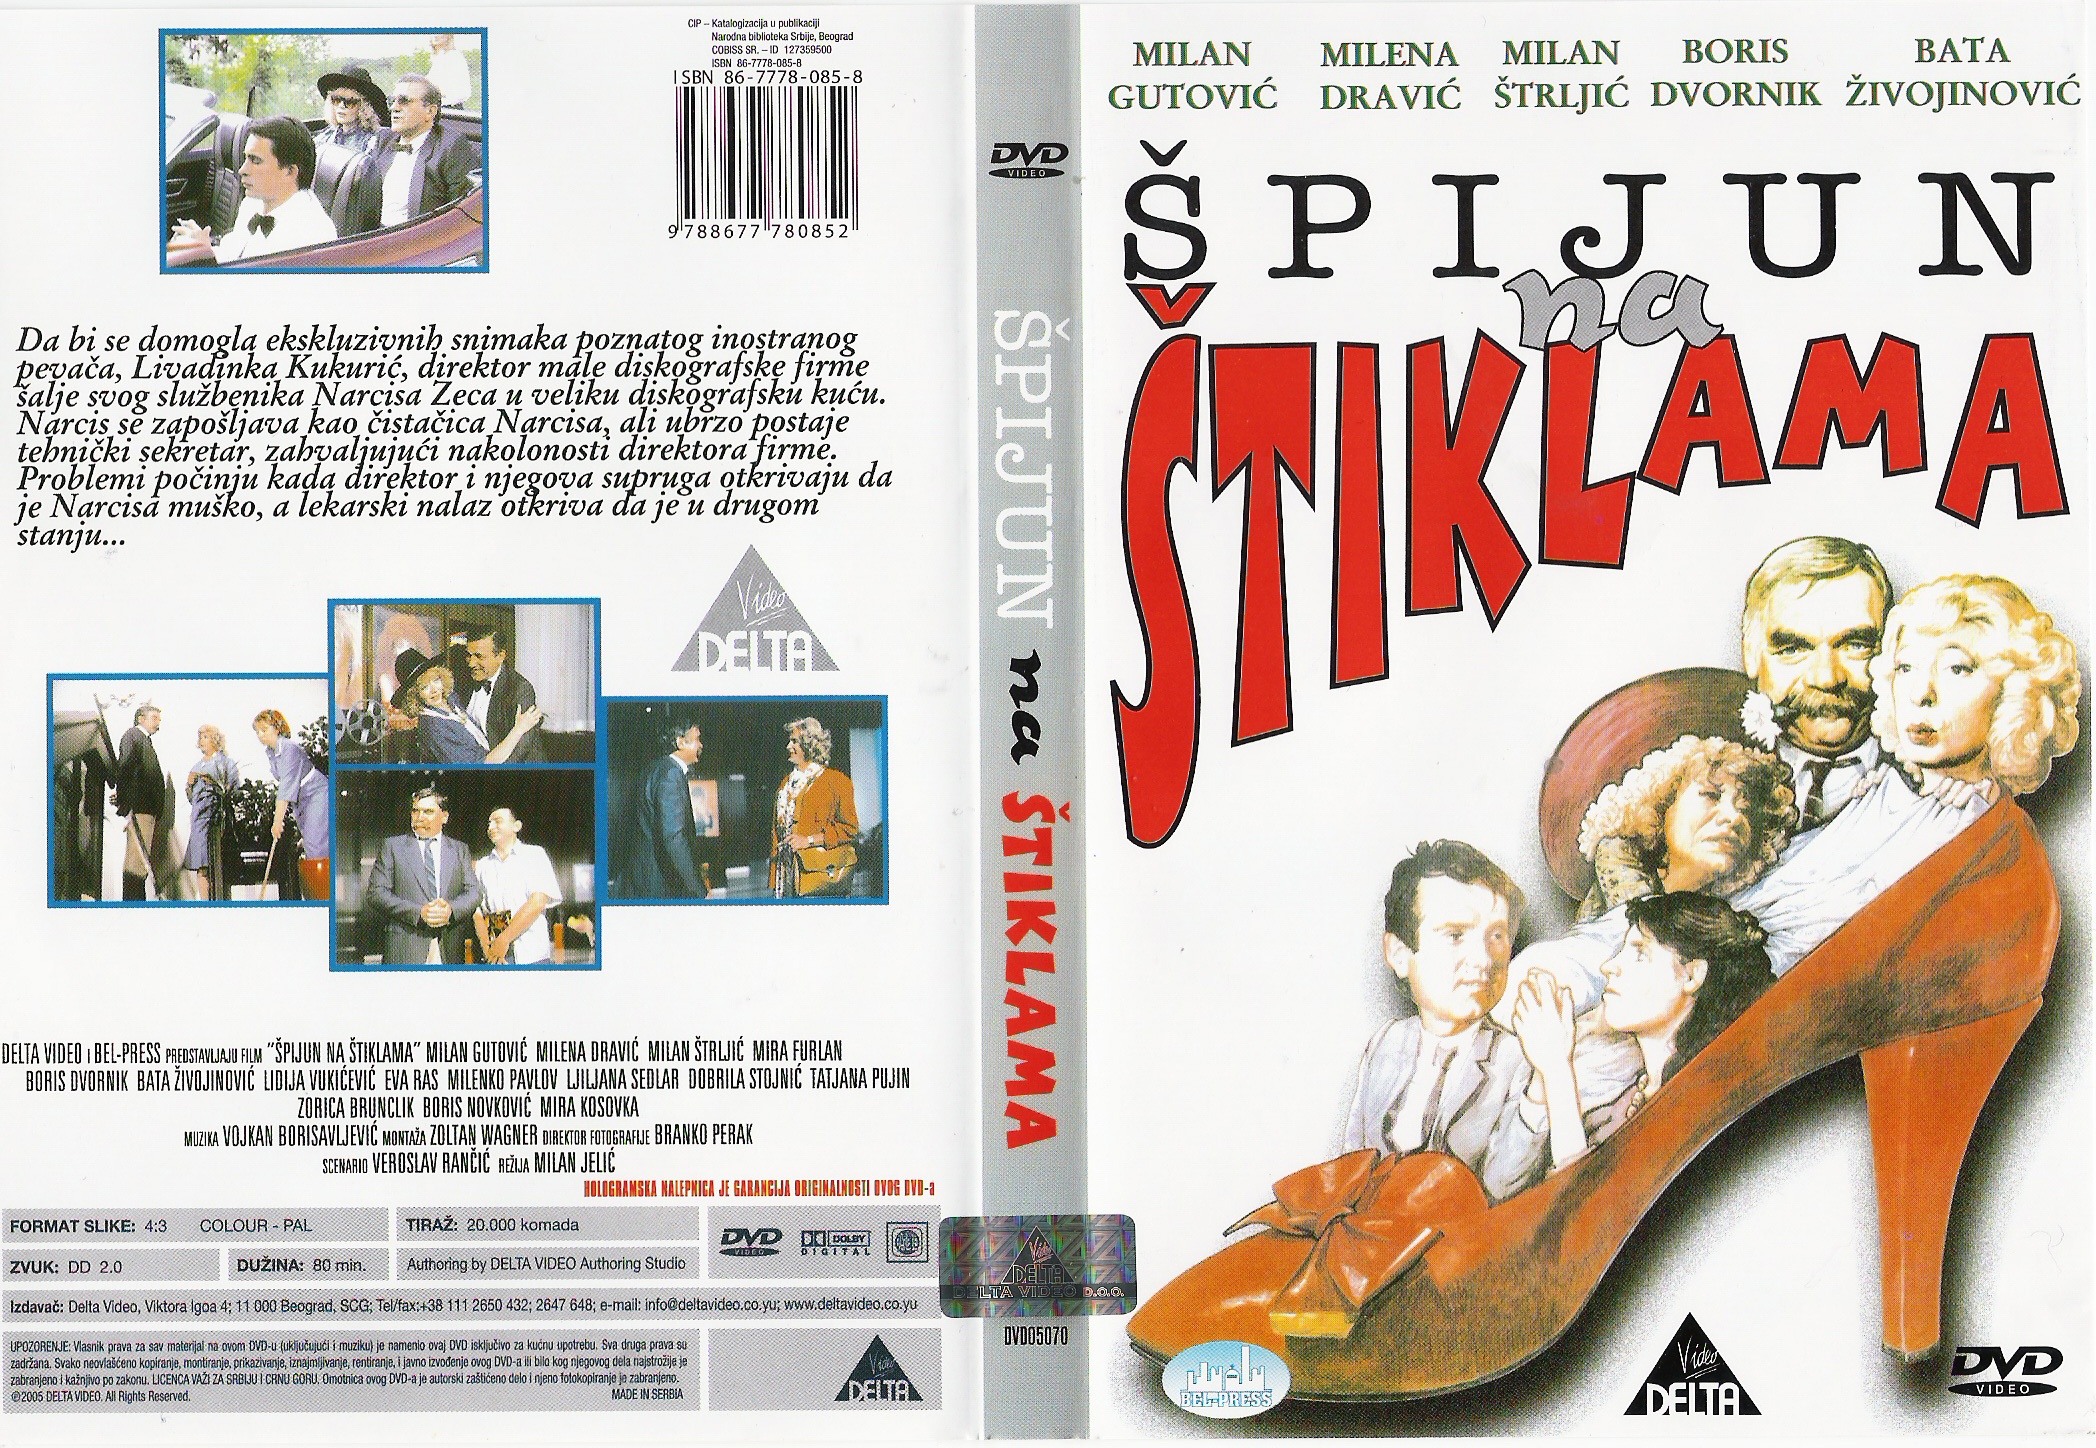 Click to view full size image -  DVD Cover - S - spiun sa stiklama cover - spiun sa stiklama cover.jpg